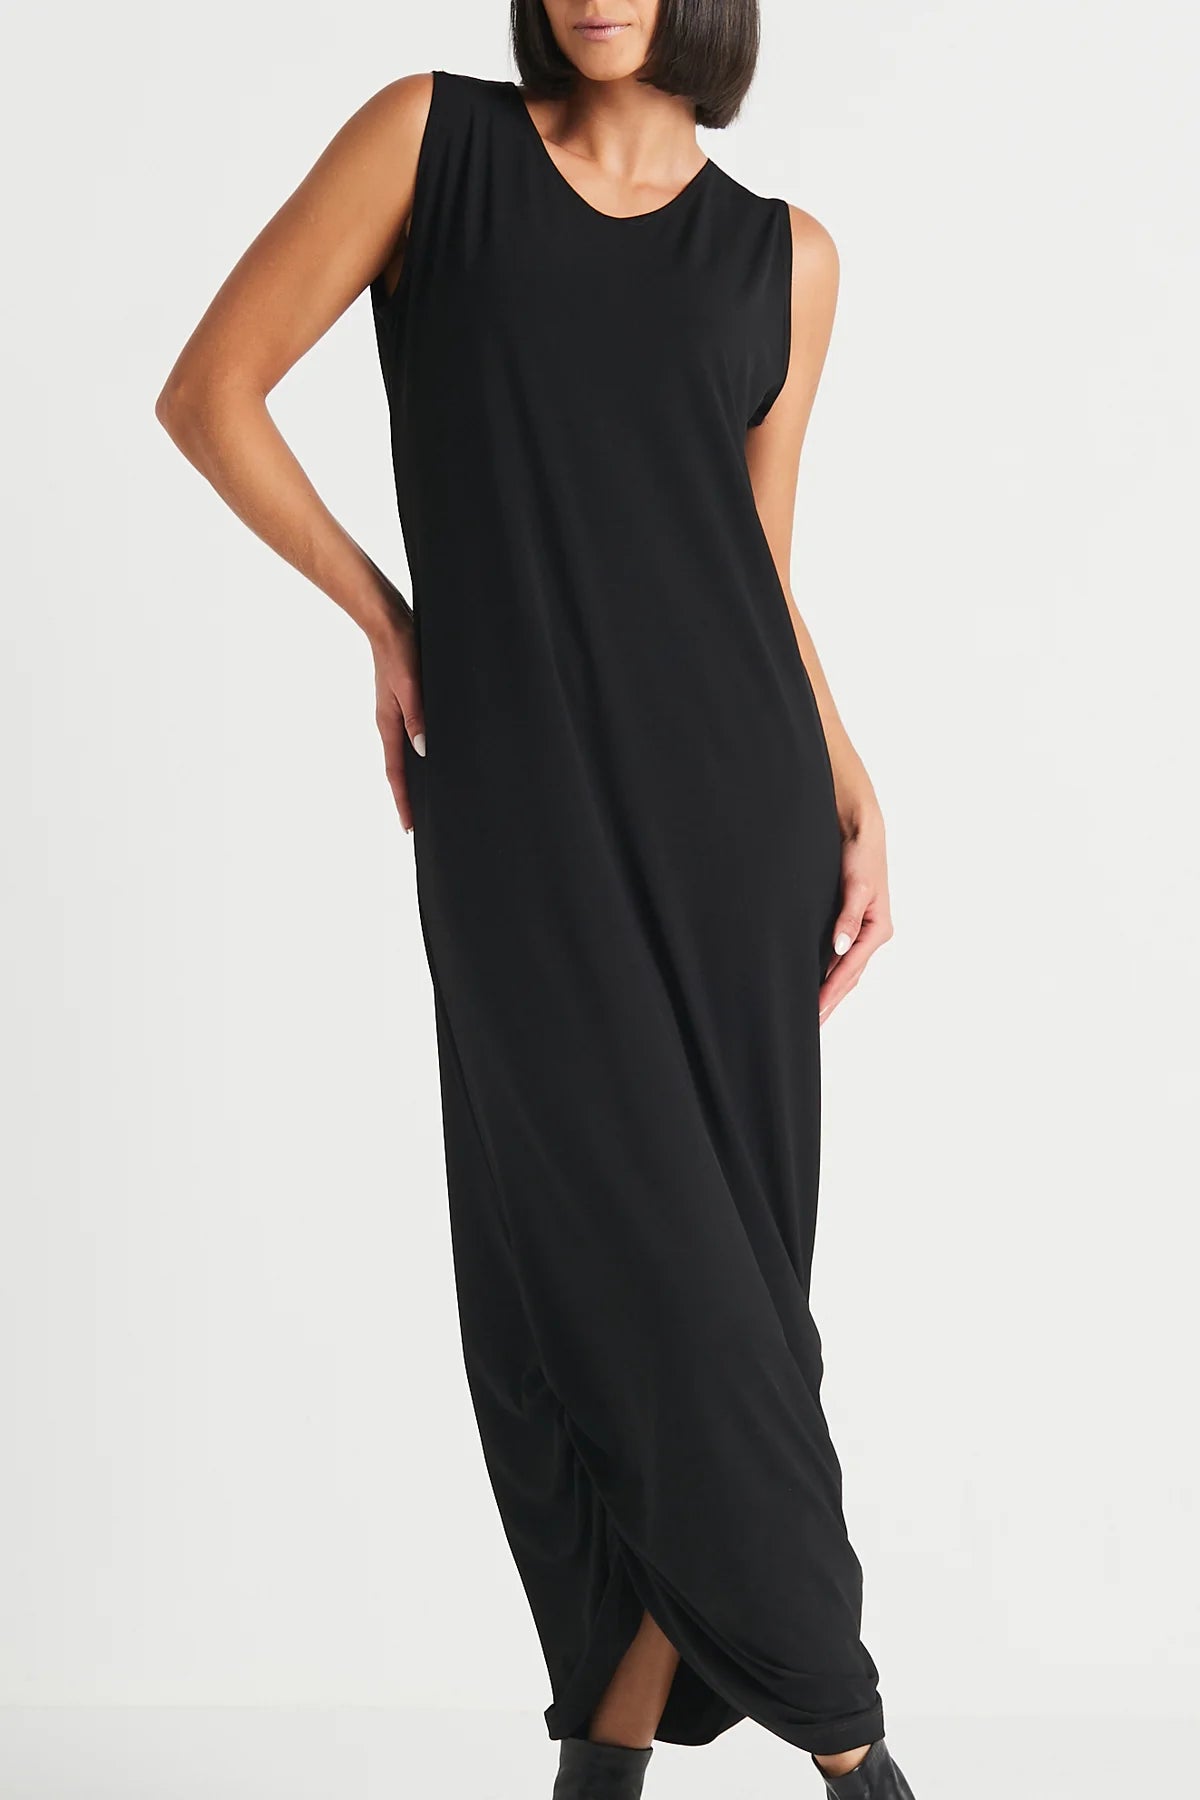 Rouched Dress | Black